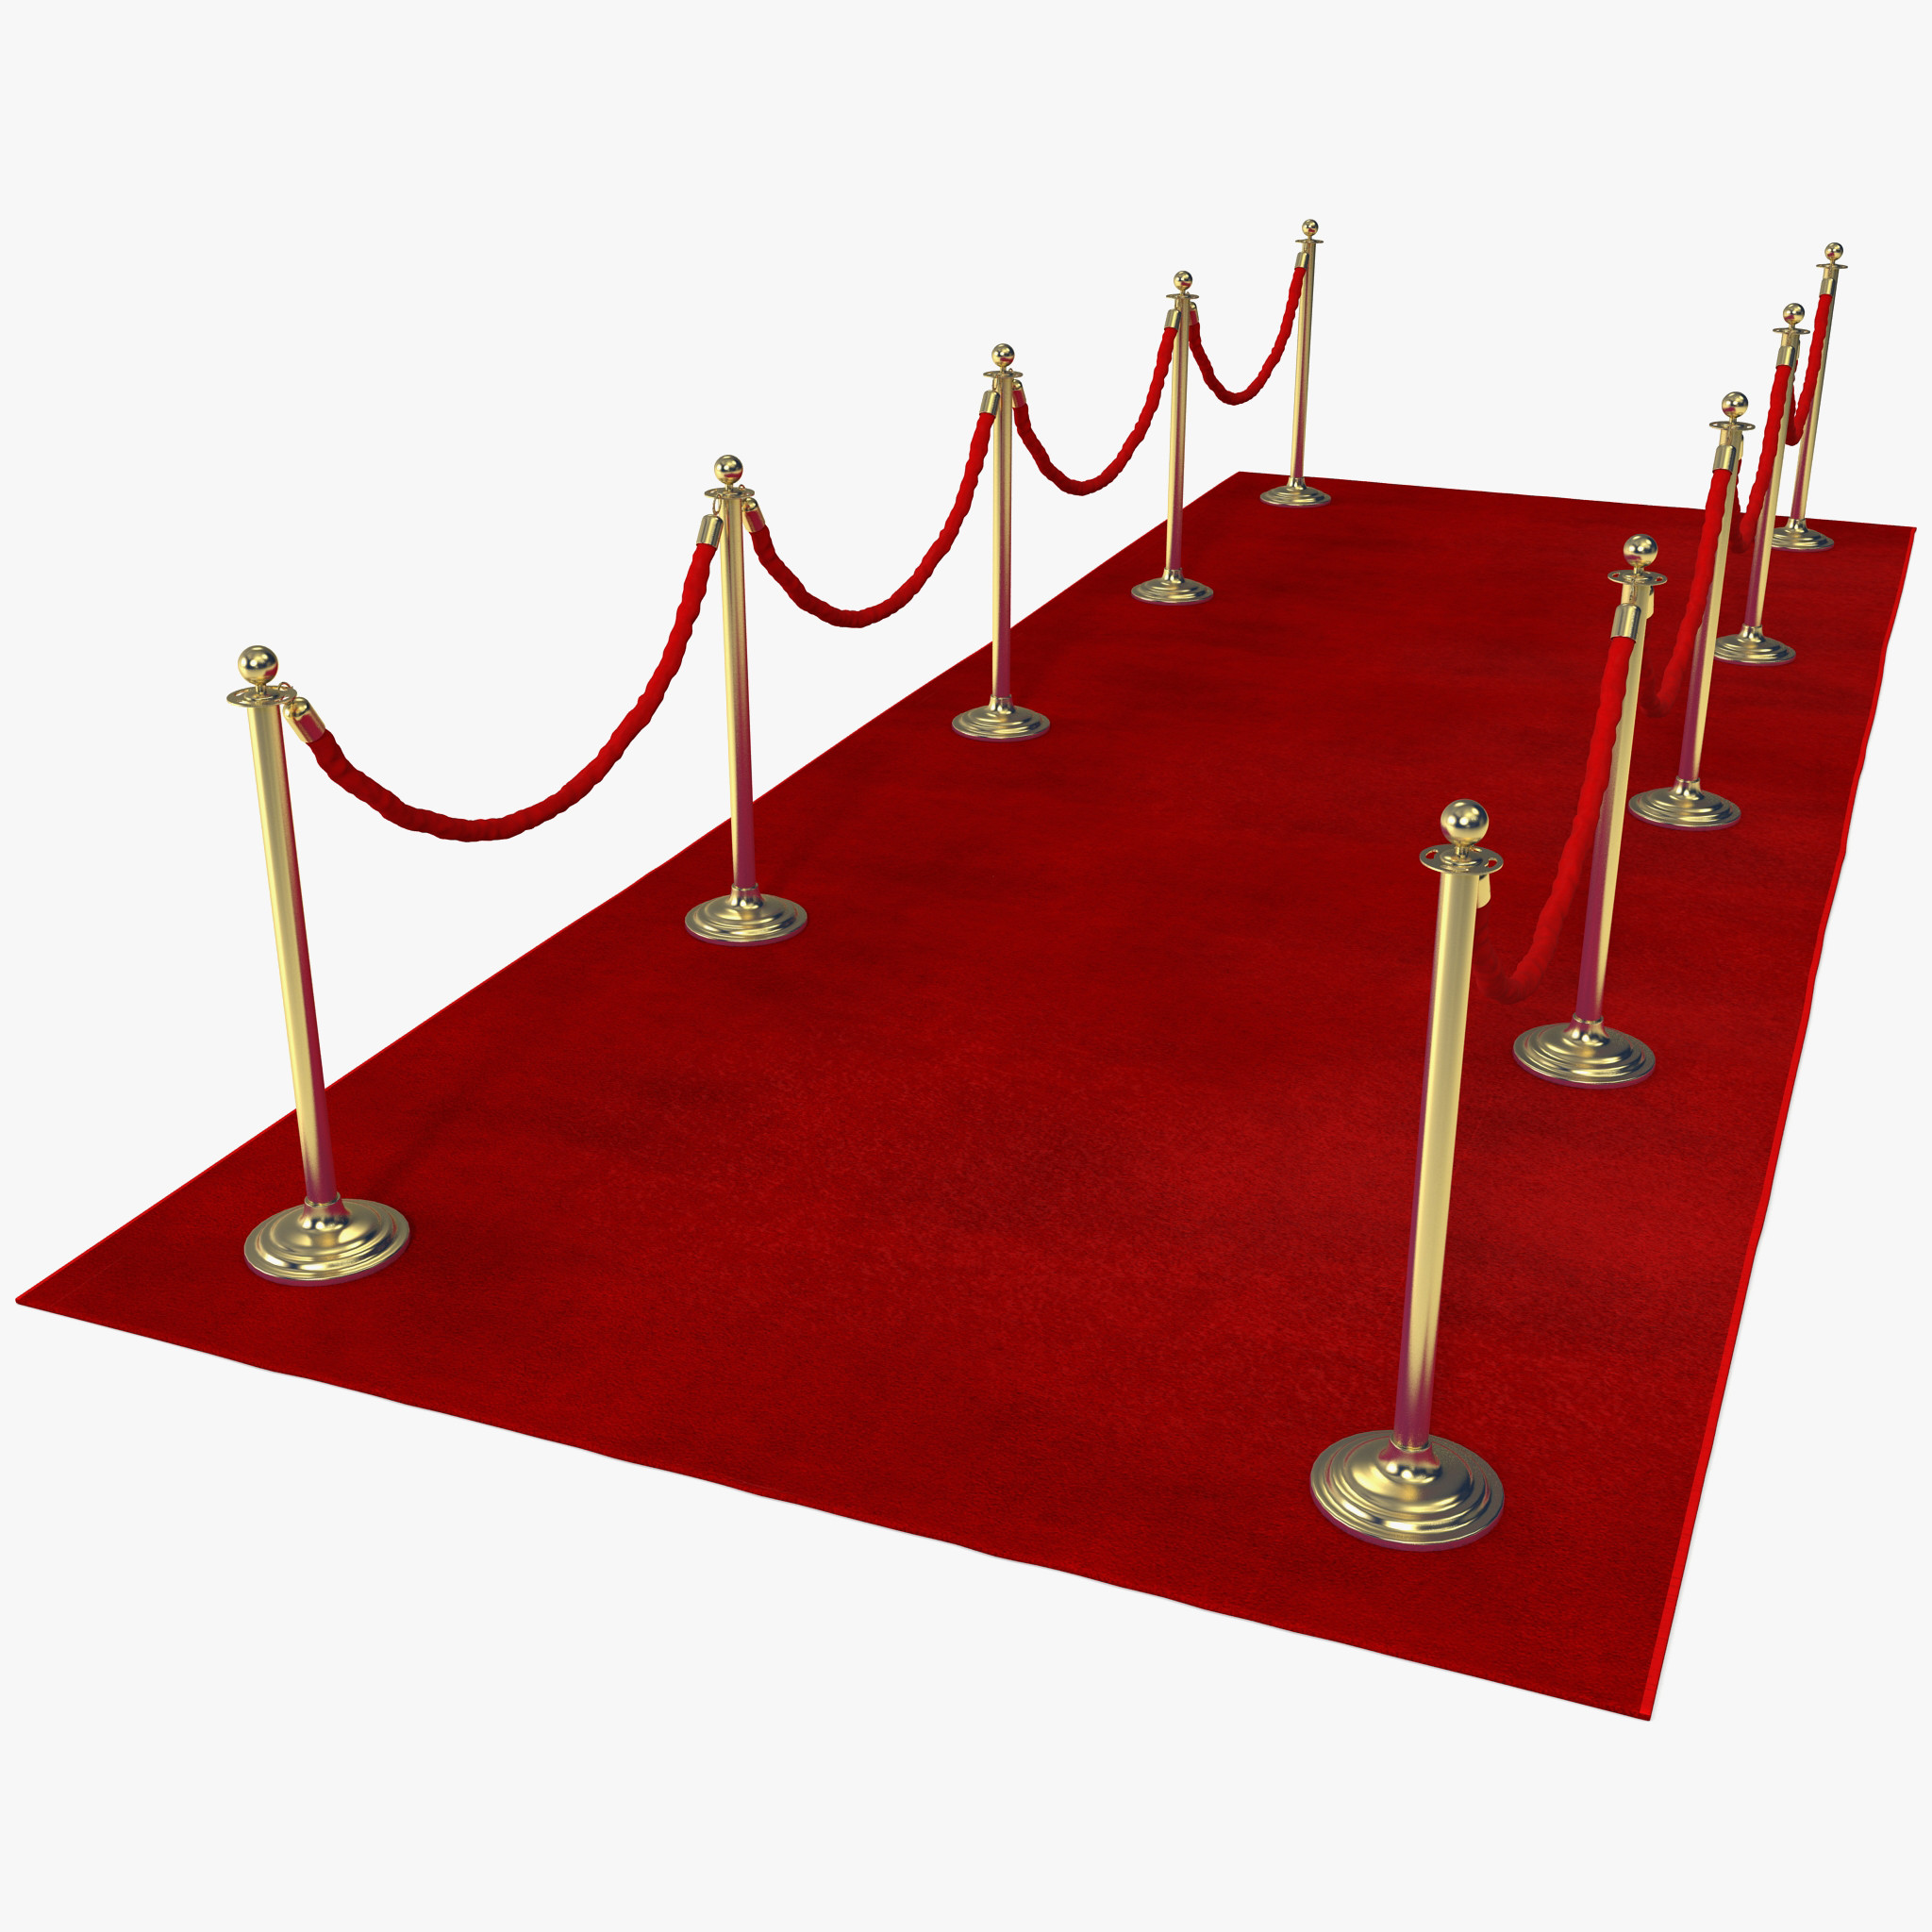 Simple Red Carpet PNG Transparent Background, Free Download #37038 -  FreeIconsPNG